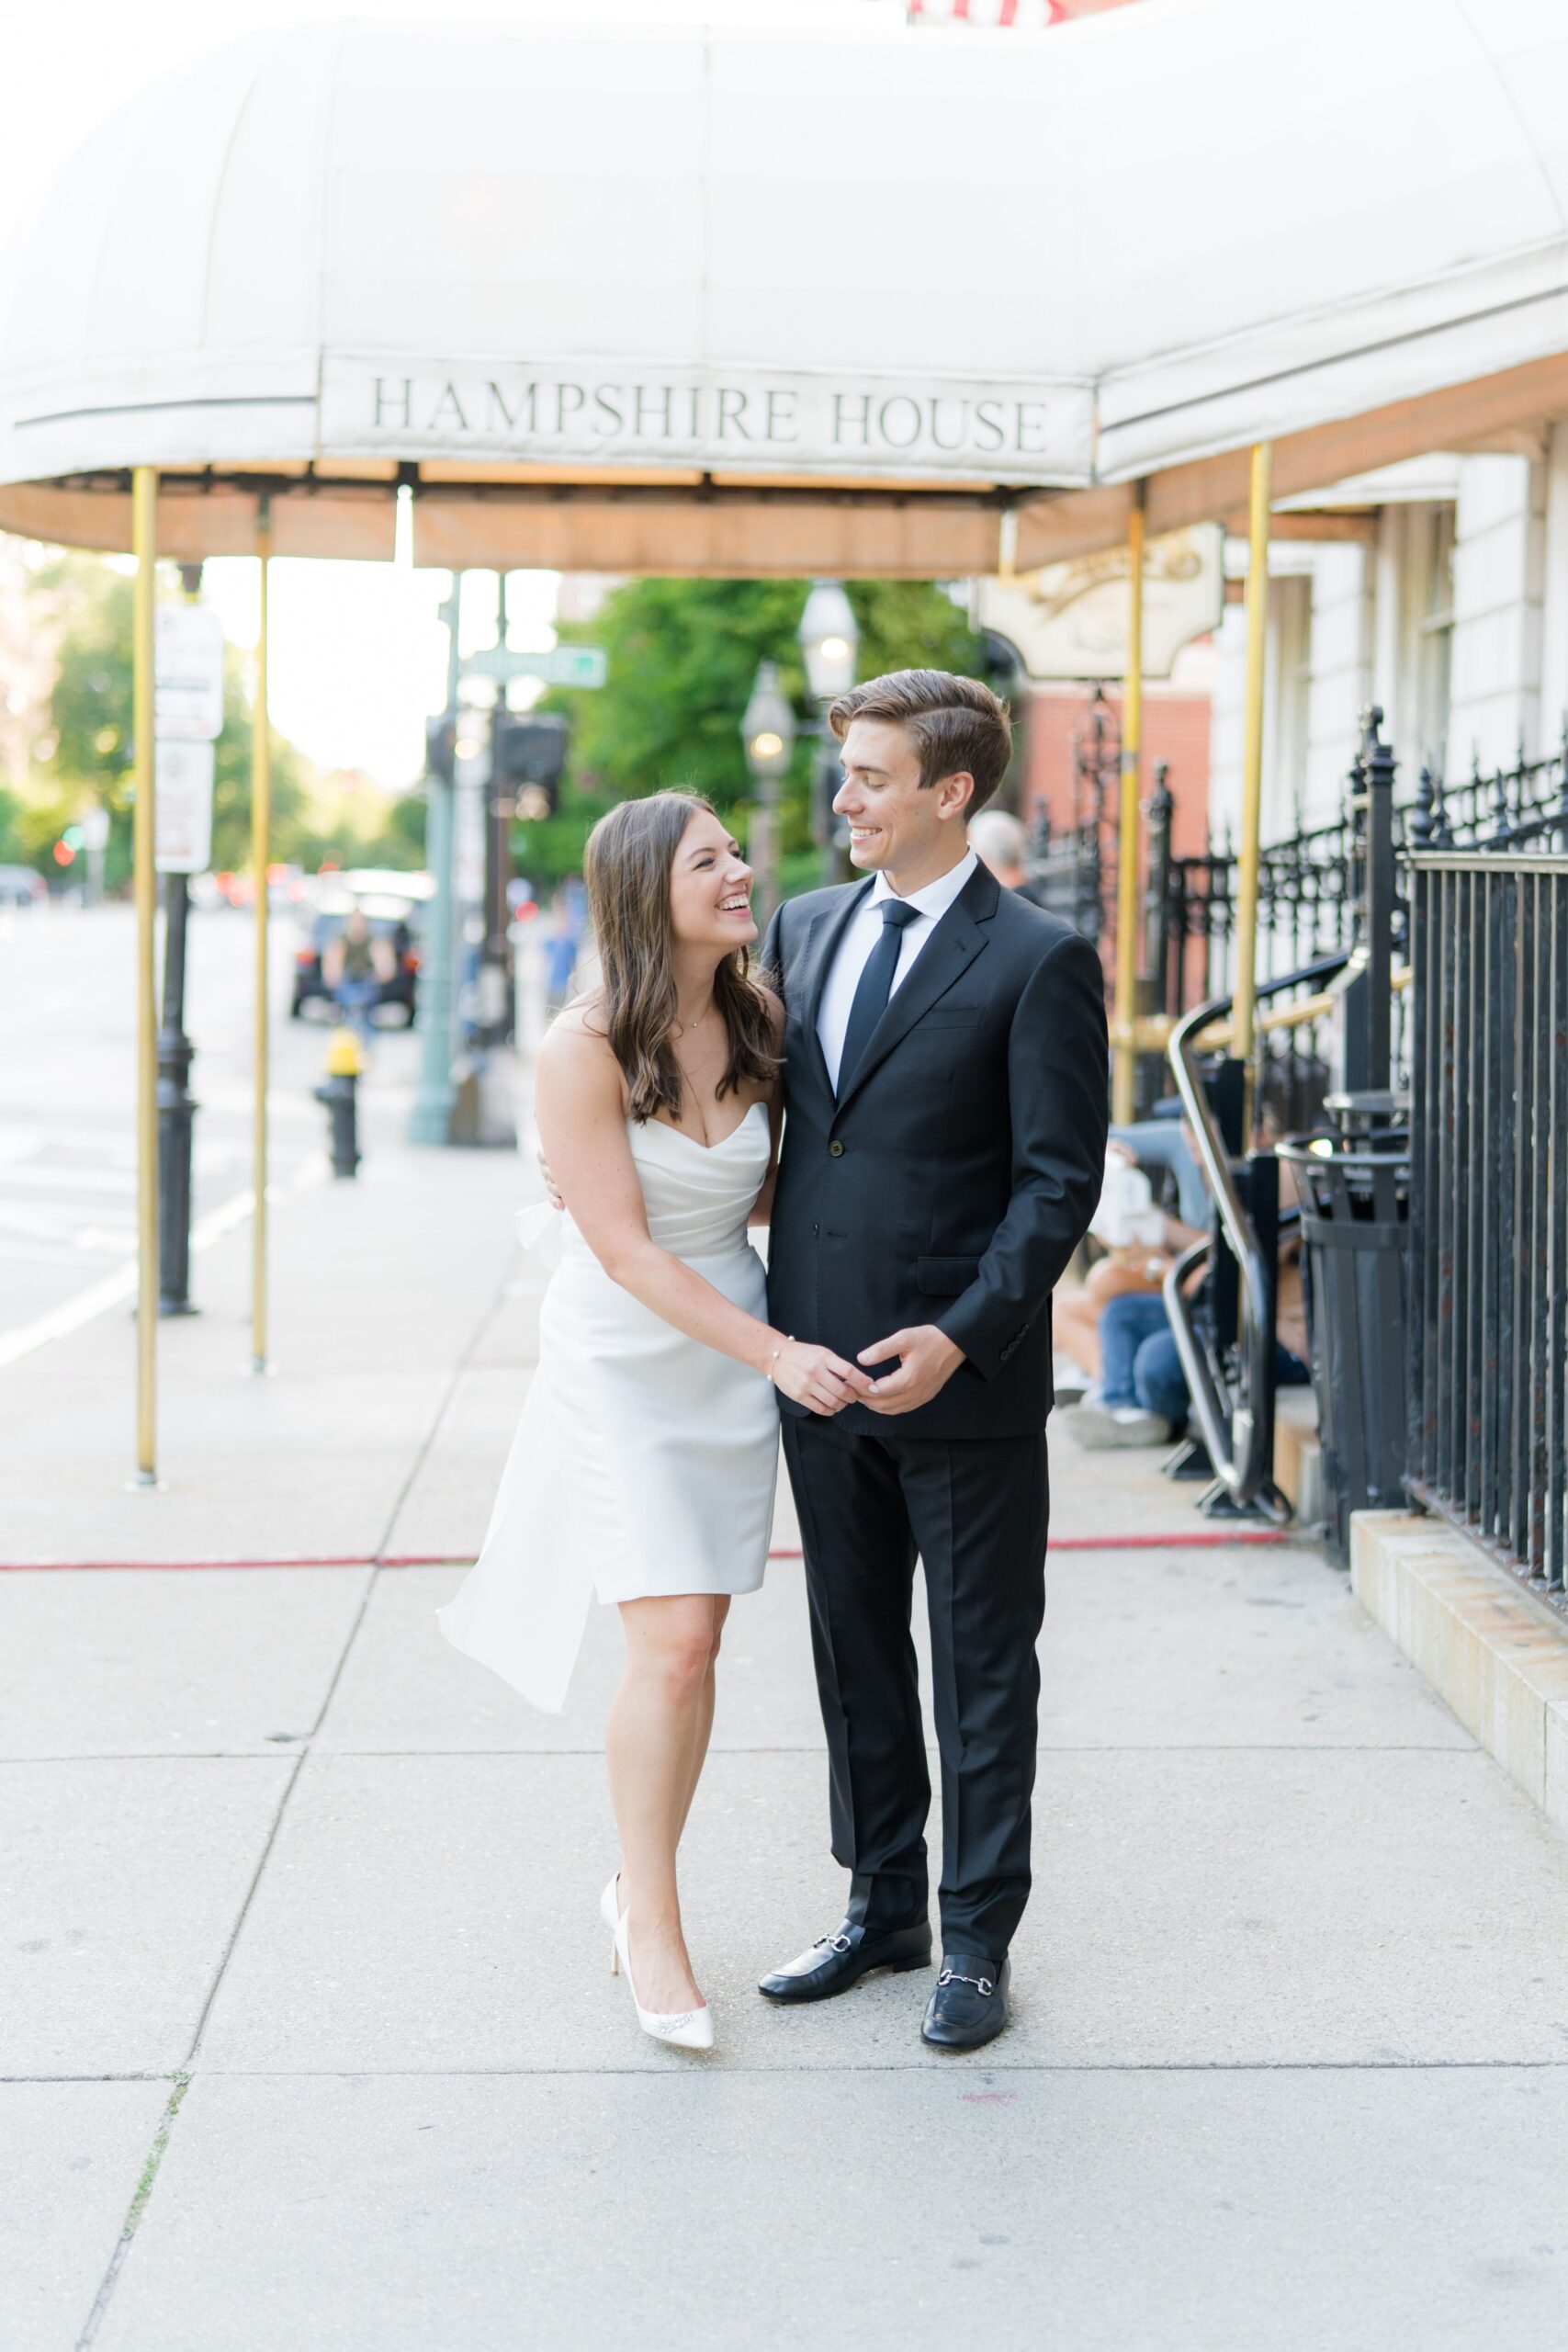 Fun moment between future bride and groom on the sidewalk in front of hampshire house near boston common.